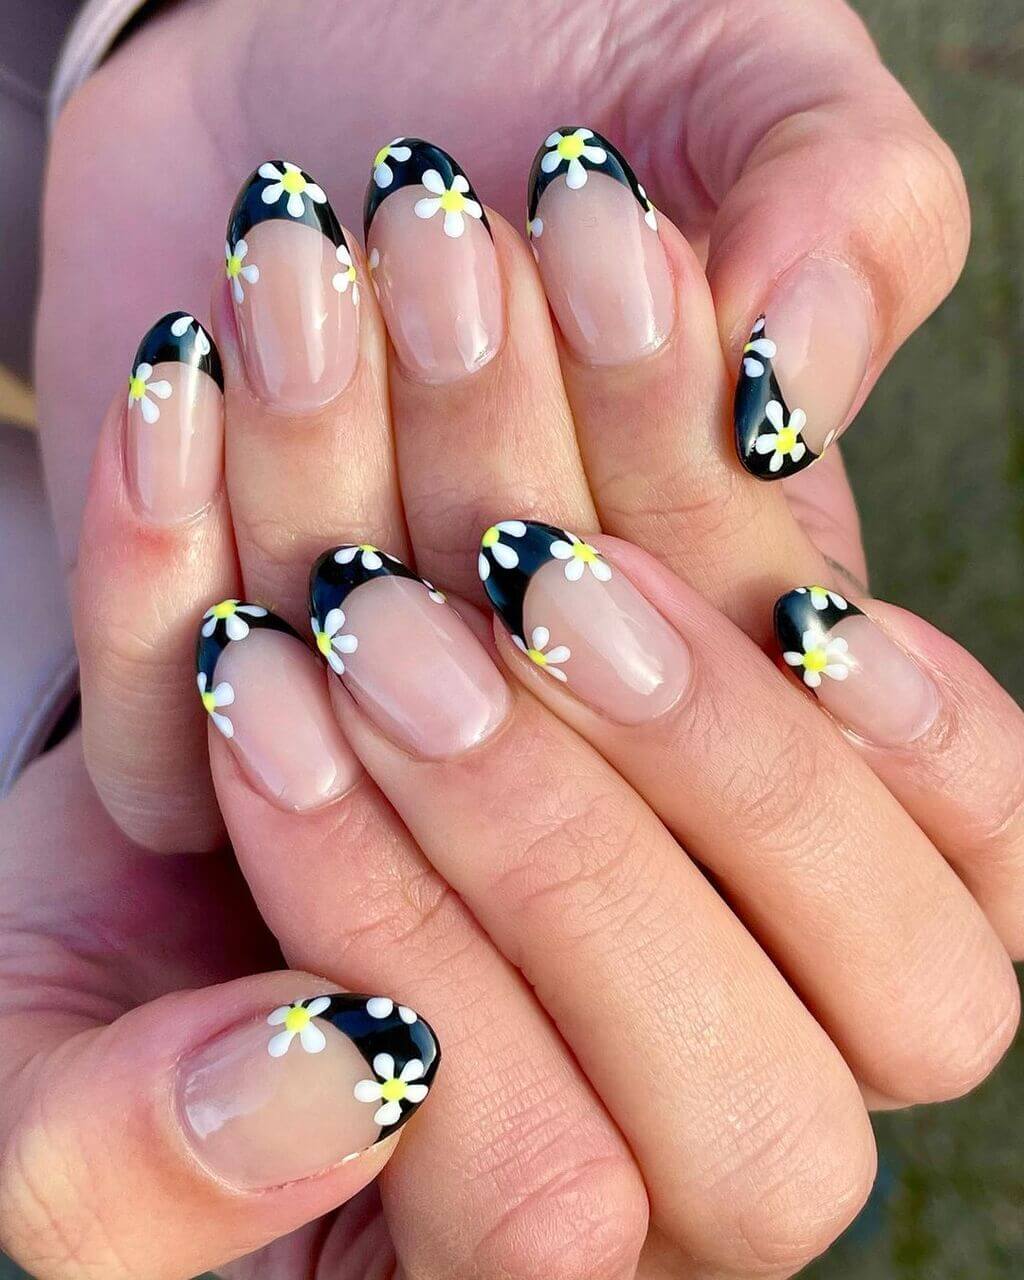 A woman's hands with black and white flowers design
